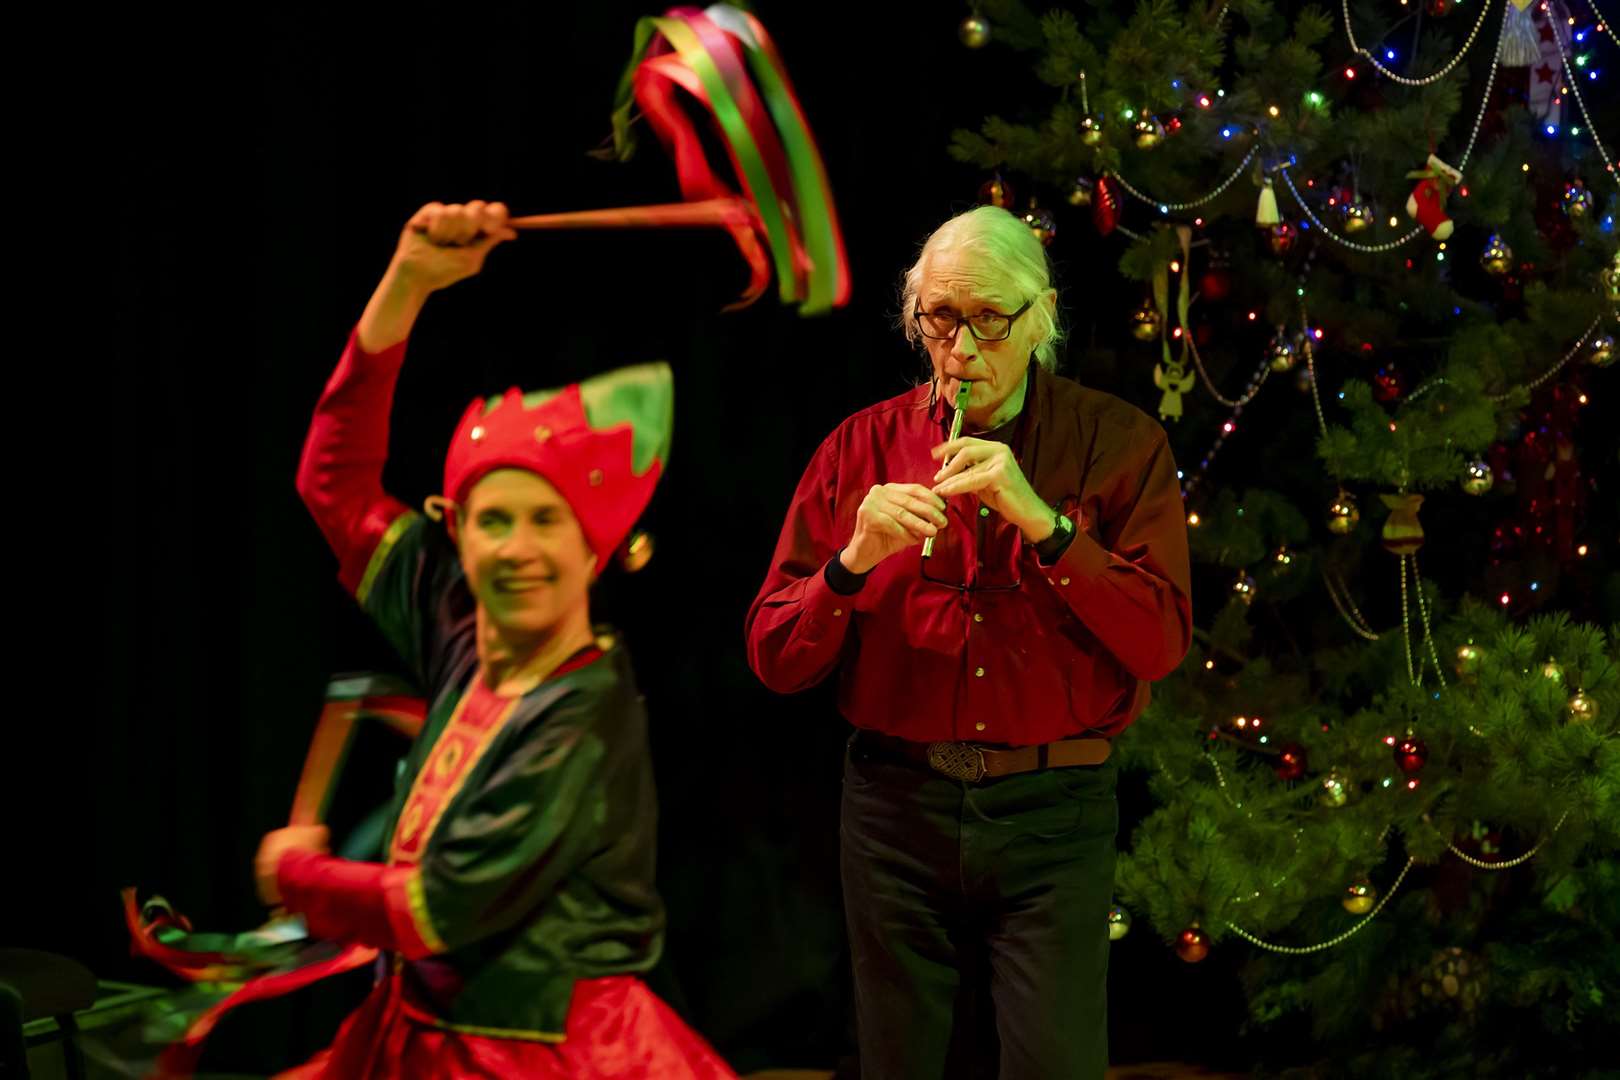 Sharon Took-Zozaya and Rory O'Connell in 'Dancing Elf'.